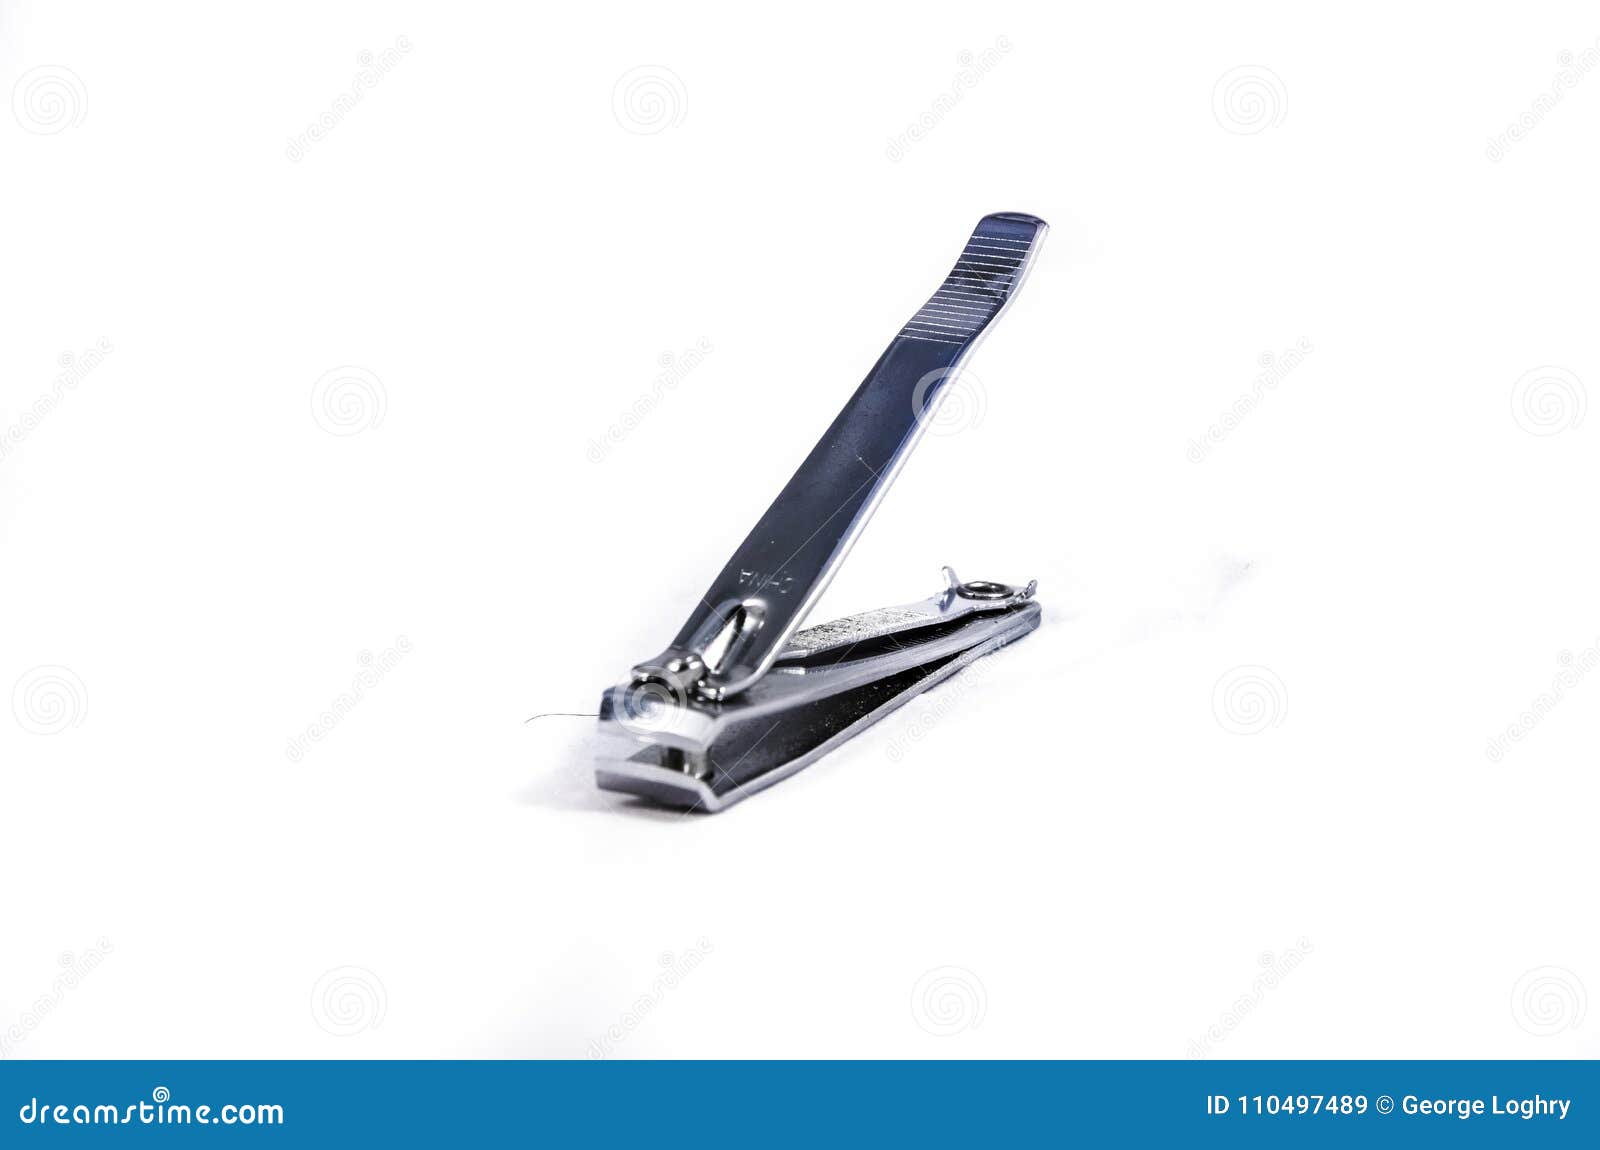 Toe Nail Clipper Ready To Go. Stock Image - Image of fagged, design:  110497489